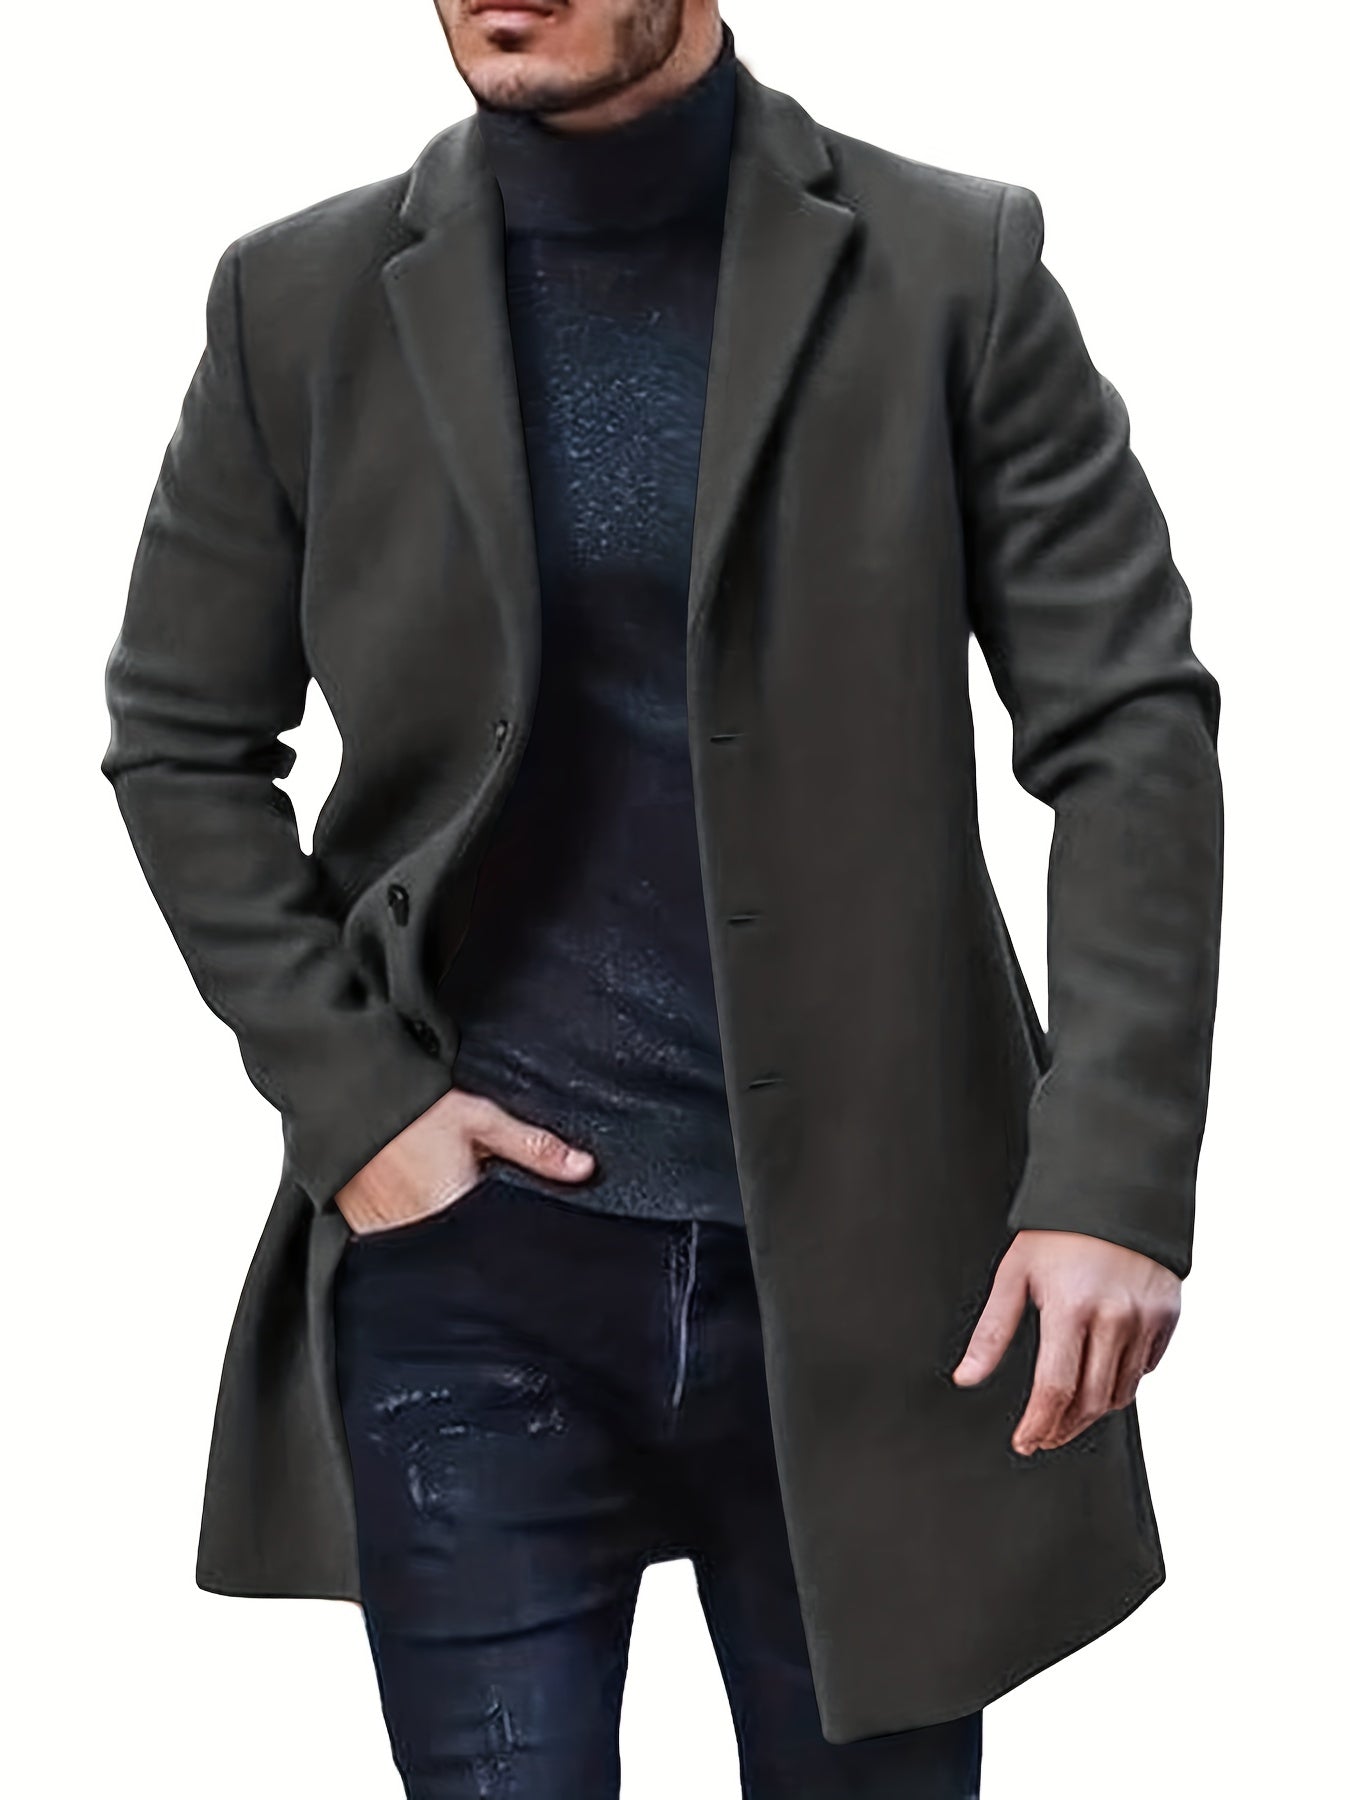 Men's Retro Trench Coat, Semi-formal Warm Single Breasted Overcoat For Fall Winter Business